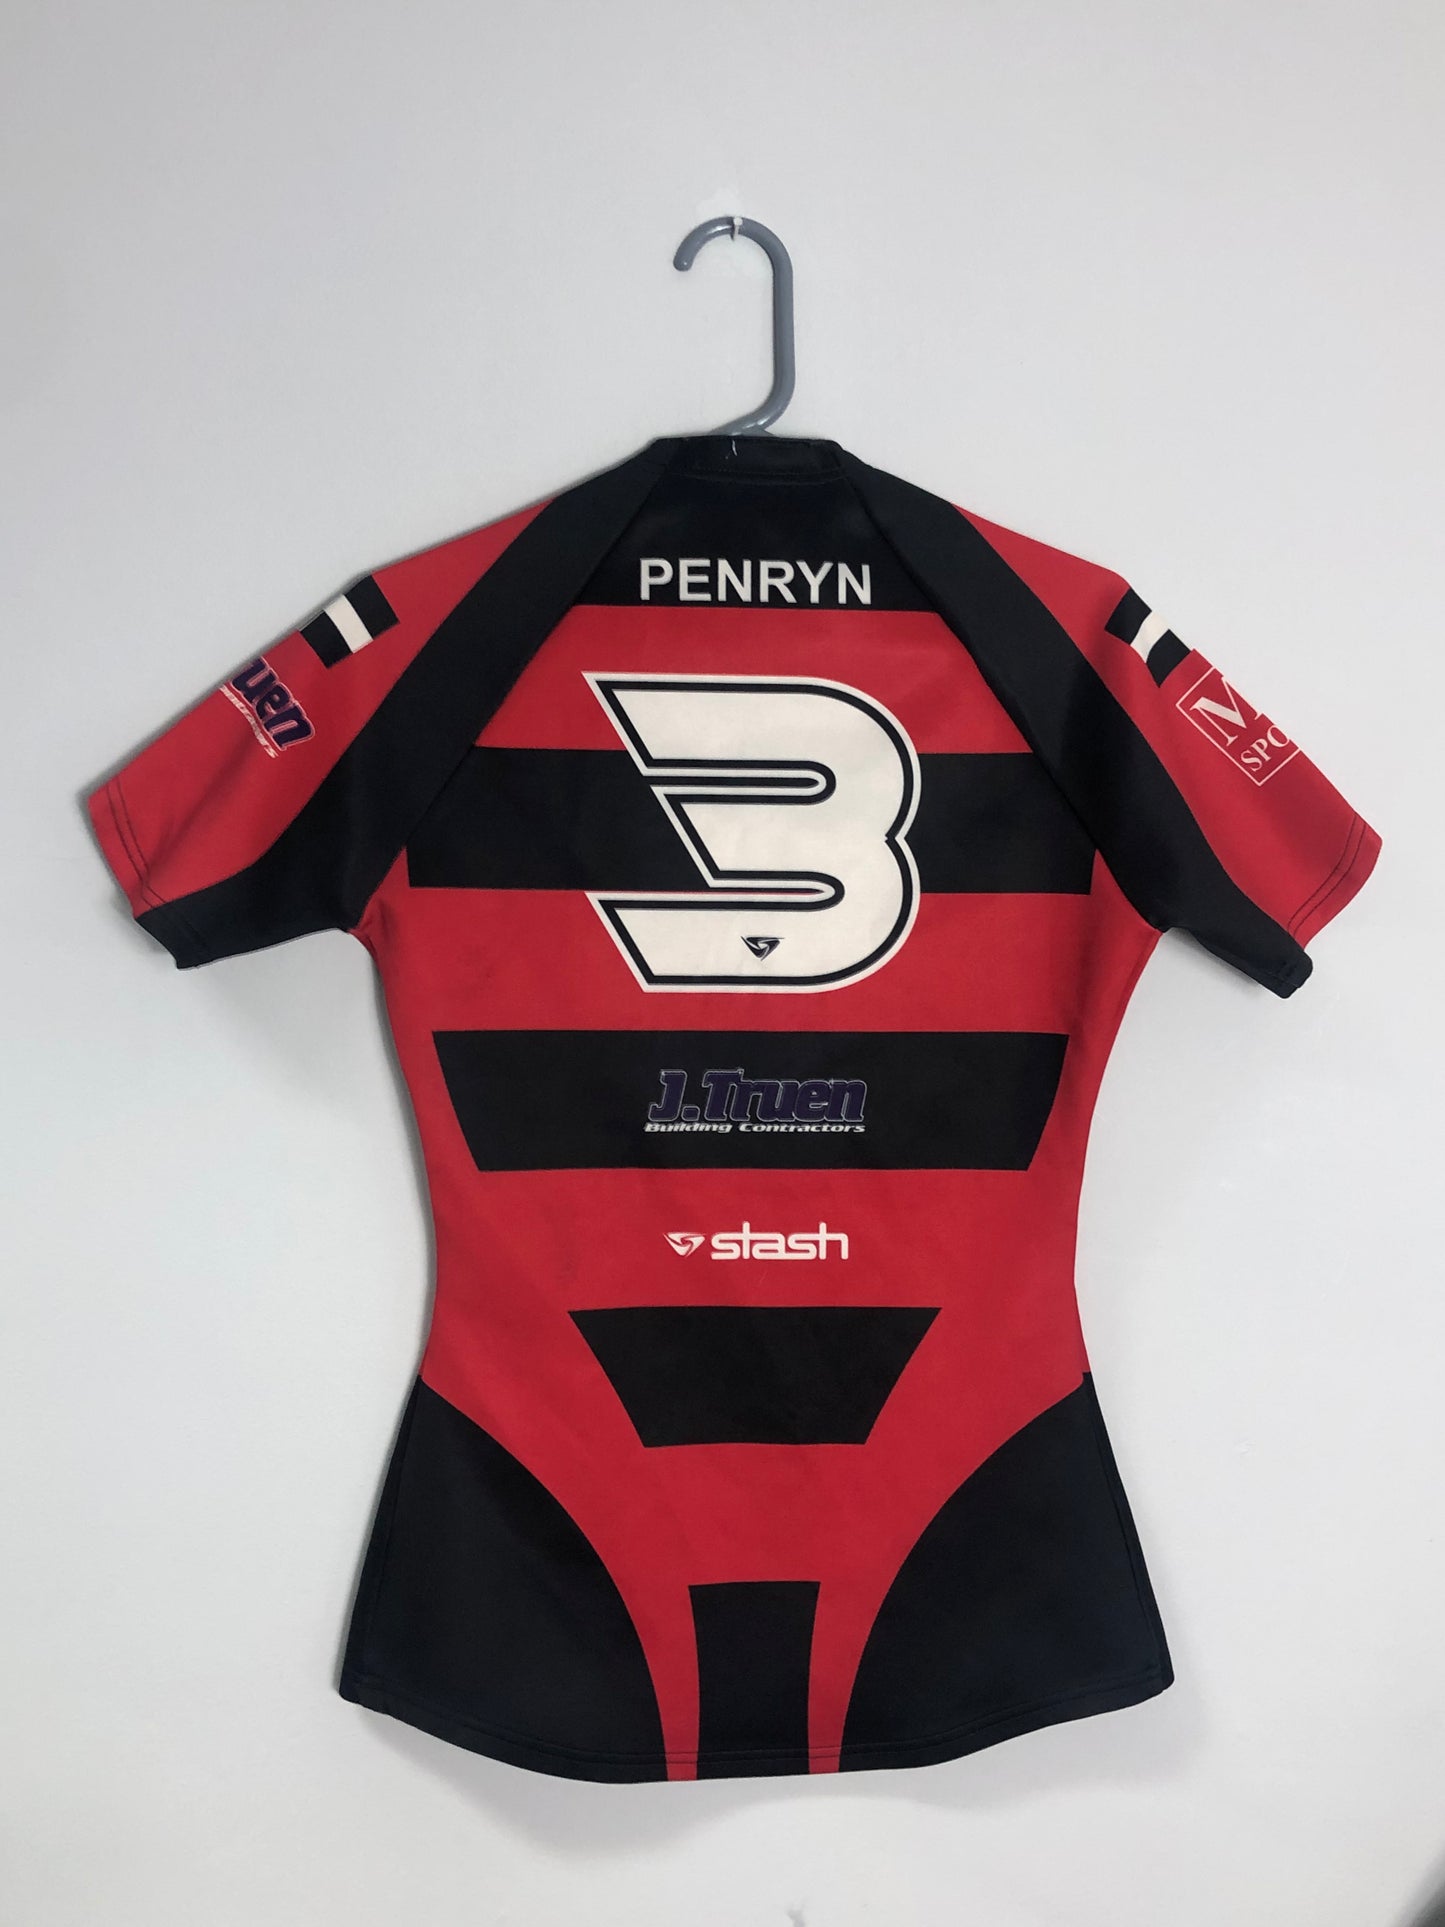 Penryn Rugby Shirt #3 - 38” Chest